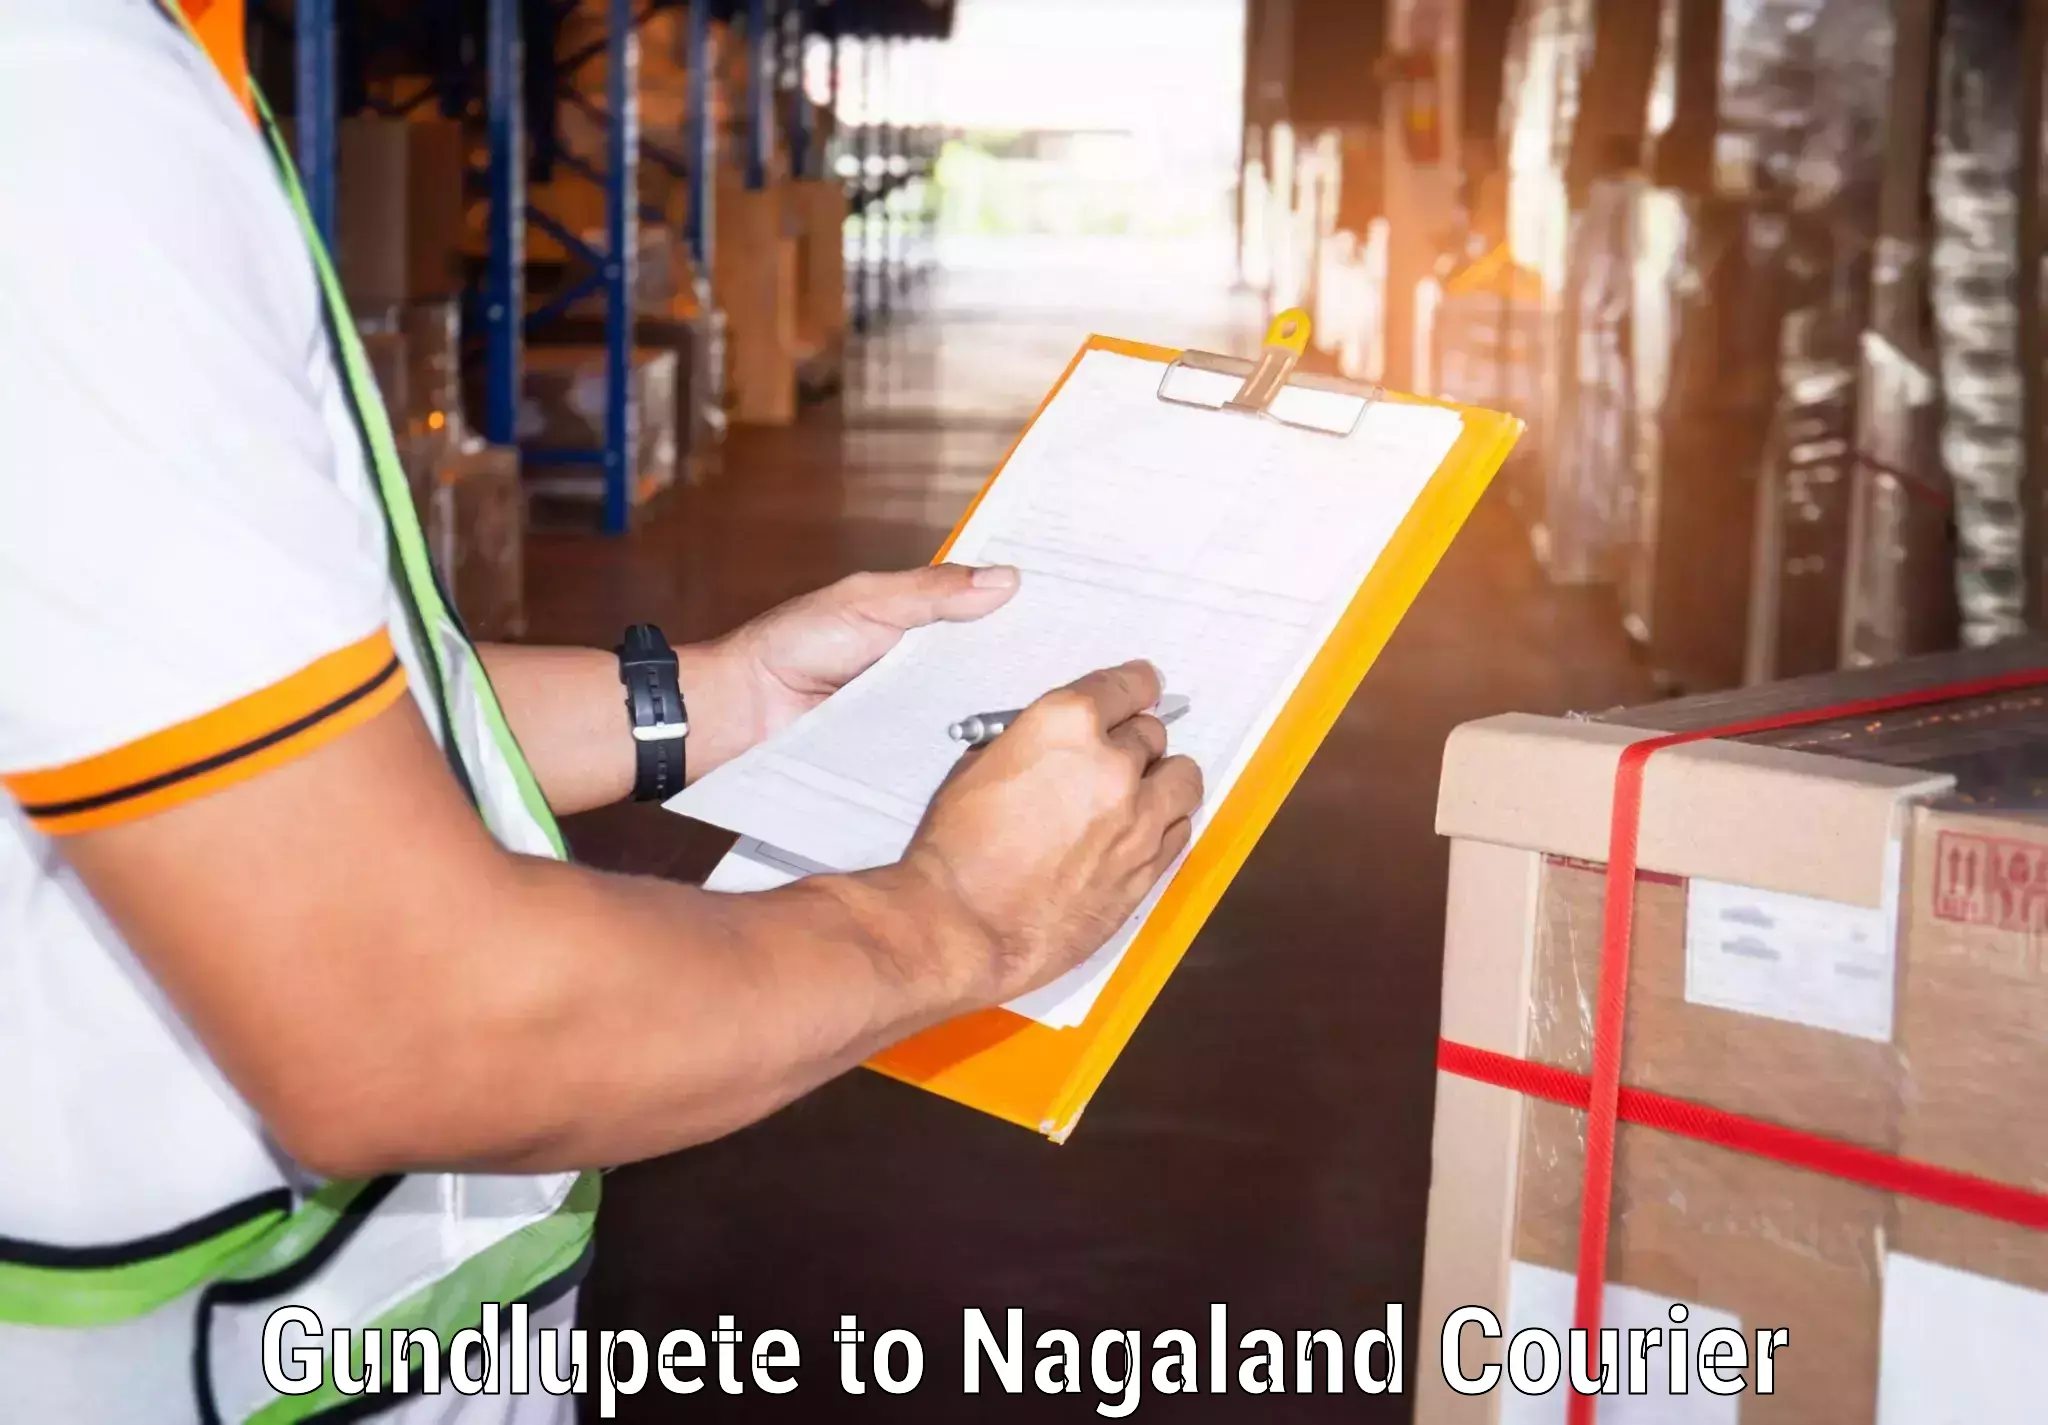 Express delivery network Gundlupete to Nagaland